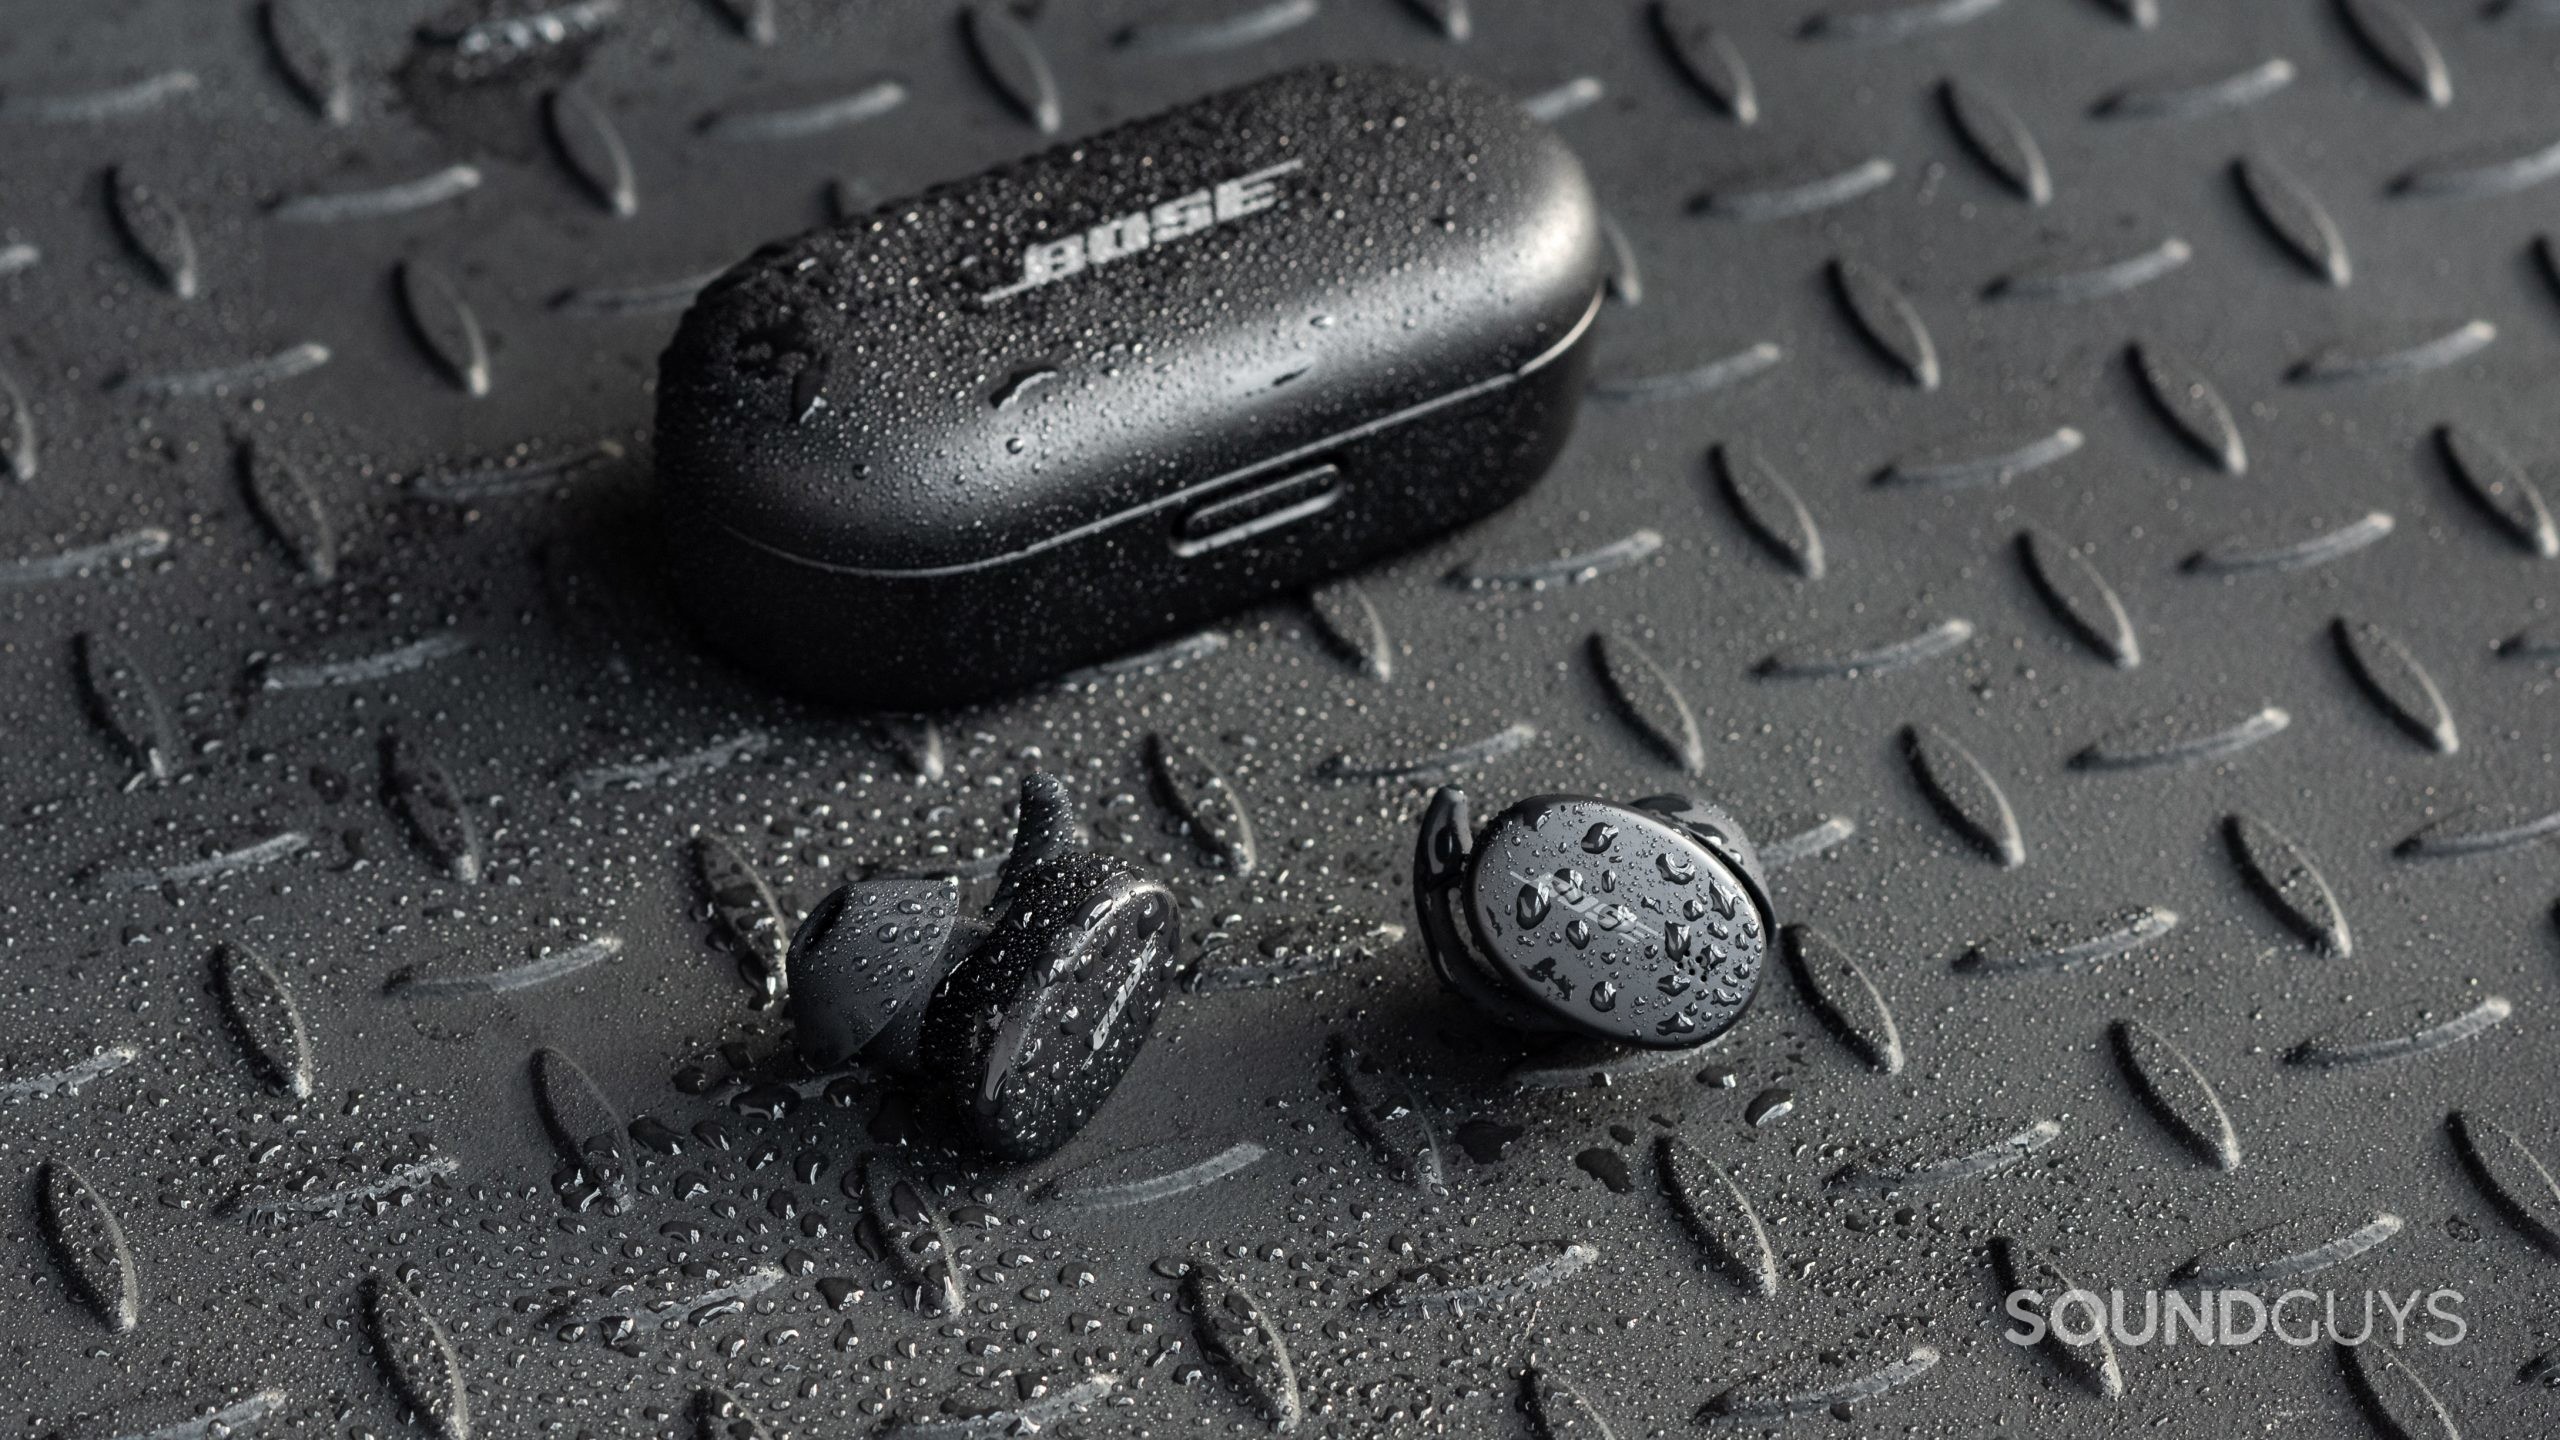 Bose Sport Earbuds review: Great sound and comfort - SoundGuys